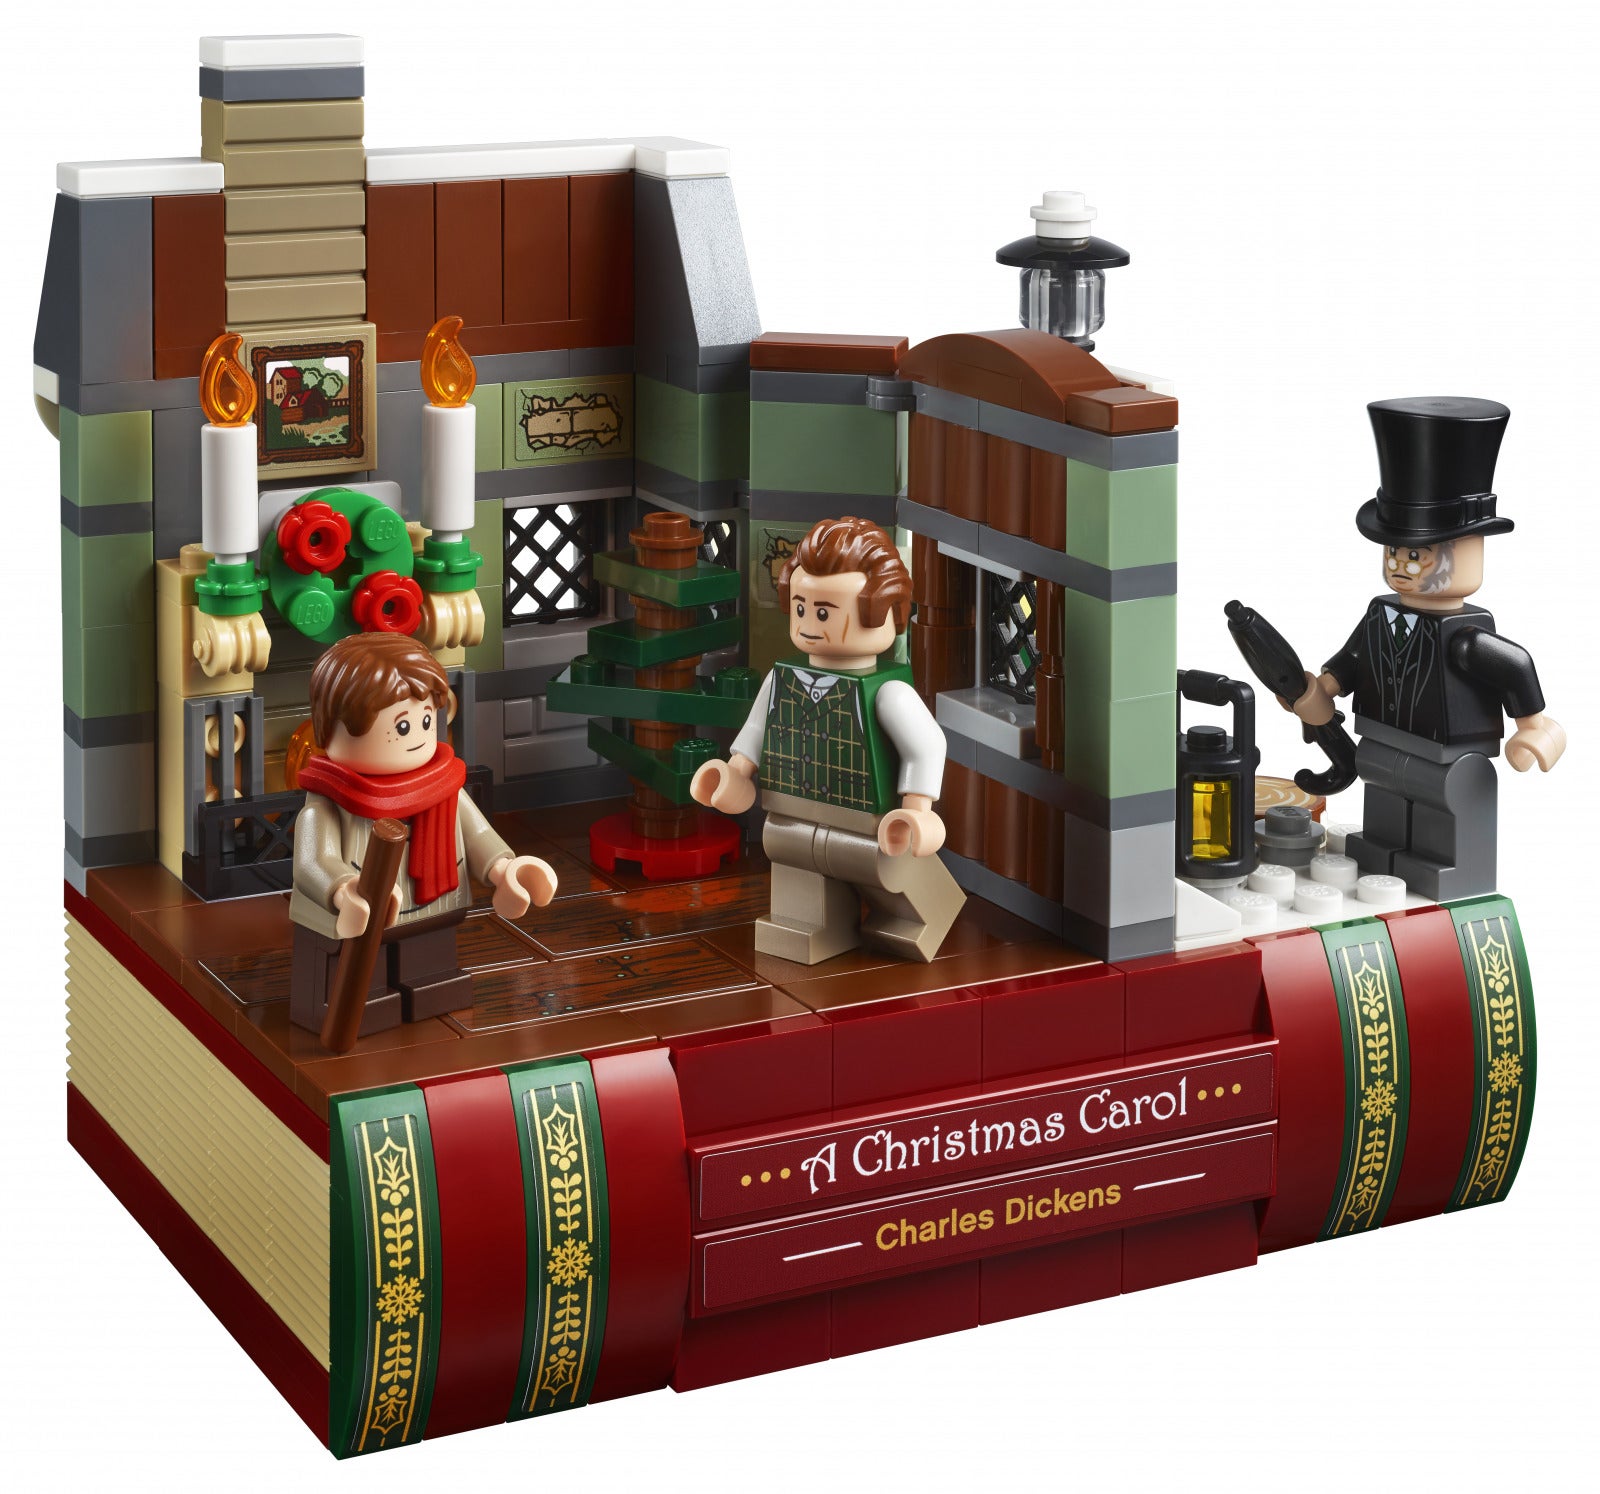 40410 LEGO Charles Dickens Tribute 1 Courtesy of The LEGO Group